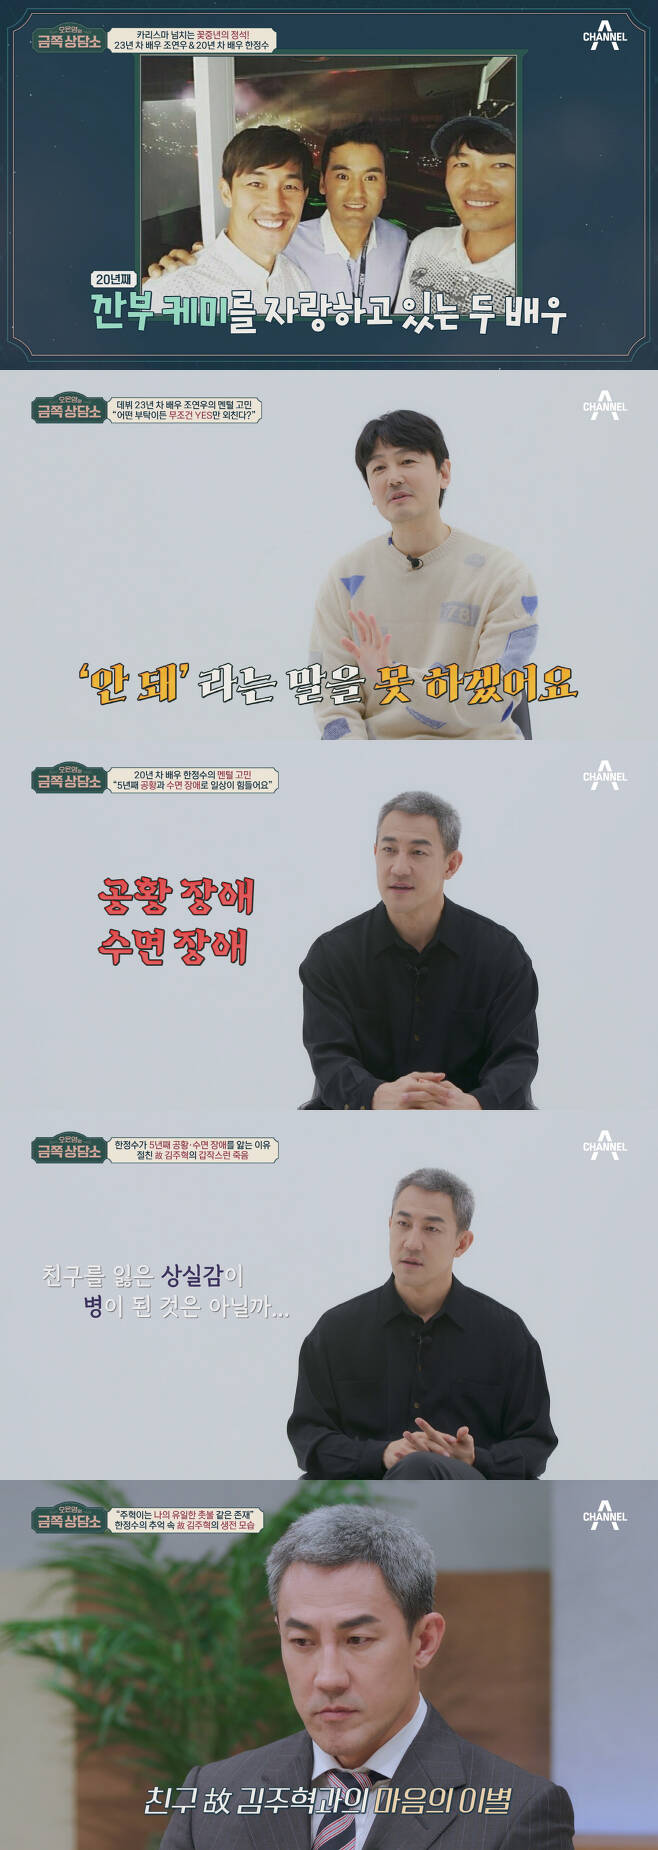 Actor Jo Yeon-woo confides his longing for the late Choi Jin-sil and Choi Jin-young.Channel As entertainment show Oh Eun-youngs Gold Counseling Center, which airs today (24th), will reveal the concerns of Jo Yeon-woo and Han Jung-soo.Jo Yeon-woo and Han Jung-soo, who appeared in a counseling center boasting a 20-year-old Kanbu Chemi with an unbelievable visual age of 50s.However, soon, the show window is the best, and it is possible to show only the stomach, and it raises the curiosity about the double consultation.First, Jo Yeon-woo, the first counselor, says, I can not say no, Confessions and tells the coffee shop staff that they can not refuse and work on behalf of the staff.In addition, when I made an appointment, I had 18 golf promises a month. In addition, at the request of an acquaintance who was in charge of the cell phone case business, I handed out Cases to my colleagues as well as unfamiliar actors and asked for promotional photos.Han Jung-soo also testified that he had taken a publicity photo with an elementary school bag that did not fit.Dr. Oh Eun Young said, Joeon-woo does not put weight on relationships as well as priorities.He then explains the rejection sensitivity that is difficult to reject because of anxiety and anxiety to be hated by others, adding that if you refuse, you are afraid that you will be alienated from your relationship with people.However, the reason why Jo Yeon-woo can not refuse is different, and it is the back door that Jo Yeon-woos 200% sympathy is drawn. It raises the question of what is the real reason why he has been hard to reject.Han Jung-soos troubles are revealed, and he says, I started suffering from panic disorder and sleep disorder five years ago.If he does not have sleeping pills, he prays all night for three to four days, and when he gets panic symptoms, he tells him that he can not calm down with one or two eggs.My best friend Jo Yeon-woo also expresses his sincere concern, testifying that Han Jung-soo always carries dozens of medicines in his pouch.Han Jung-soo confides that the time of panic disorder and sleep disorder was after the death of Kim Joo-hyuk, the best actor who left in a traffic accident five years ago.After the death of Friend, I feel like I have been left alone in the world.It was a bright personality that was an atmosphere maker everywhere, but he has never laughed properly since Friends death, and since that day, all human relationships have been cut off and he has also broken up with his girlfriend.In response, Dr. Oh Eun Young analyzes that Han Jung-soo is suffering from Post Traumatic Mourning Syndrome, which is a combination of Post Traumatic Stress Syndrome (PTSD) and Mourning.In addition, he advises that he does not seem to have gone through the process of mourning, and conducts counseling to comfort Han Jung-soo through Mourning Process Step 3.Dr. Oh Eun Young and a counseling center family comfort Han Jung-soo, explaining that everyone is going to leave their loved ones without exception.In particular, the master, Park Jae-rae, recalls when his father died in the past, and his grandmother could not recognize his sons death, so he could not abandon herbal medicine for several years. Confessions and made the studio into a sea of tears.Dr. Oh Eun Young focused on the reason why Han Jung-soo can not recover everyday for six years after Kim Joo-hyuks death and asked Han Jung-soo what kind of friend Kim Joo-hyuk was. Han Jung-soo reminds me of memories with the deceased.Dr. Oh Eun Young, who captured Han Jung-soos late Kim Joo-hyuk as a parent-like attachment target, surprised everyone by revealing why panic disorder and sleep disorder drugs do not work.Dr. Oh Eun Young then suggests that Han Jung-soo should be separated from the late Kim Joo-hyuk in order to recover to his daily life.Han Jung-soo, who hesitated for a while, gave courage, and the studio soon became a tearful sea.What is the customized silver magic of Dr. Oh Eun Young delivered to Jo Yeon-woo and Han Jung-soo?On the other hand, Jo Yeon-woo, who looked at Han Jung-soo with anxious eyes, opens his mouth with difficulty.Confessions that she was close enough to listen to her photo, carefully mentioning her relationship with the late choi jin-sil, who had never been on the air before.Jo yeon-woo, who met with the late choi jin-sil the day before the accident, had a hard time with his unbelievable death, and when he left the late Choi Jin-young two years later, he said, I did not even think about it.However, because of the family to be responsible, I thought that I would have to pay for three years in my heart to overcome my sadness, and from the fourth year I realized that I did not go to the anniversary to overcome the pain.On the other hand, Oh Eun Youngs a gold piece a counseling center is a national mental care program of Oh Eun Young, a national mentor who solves a lot of troubles together.